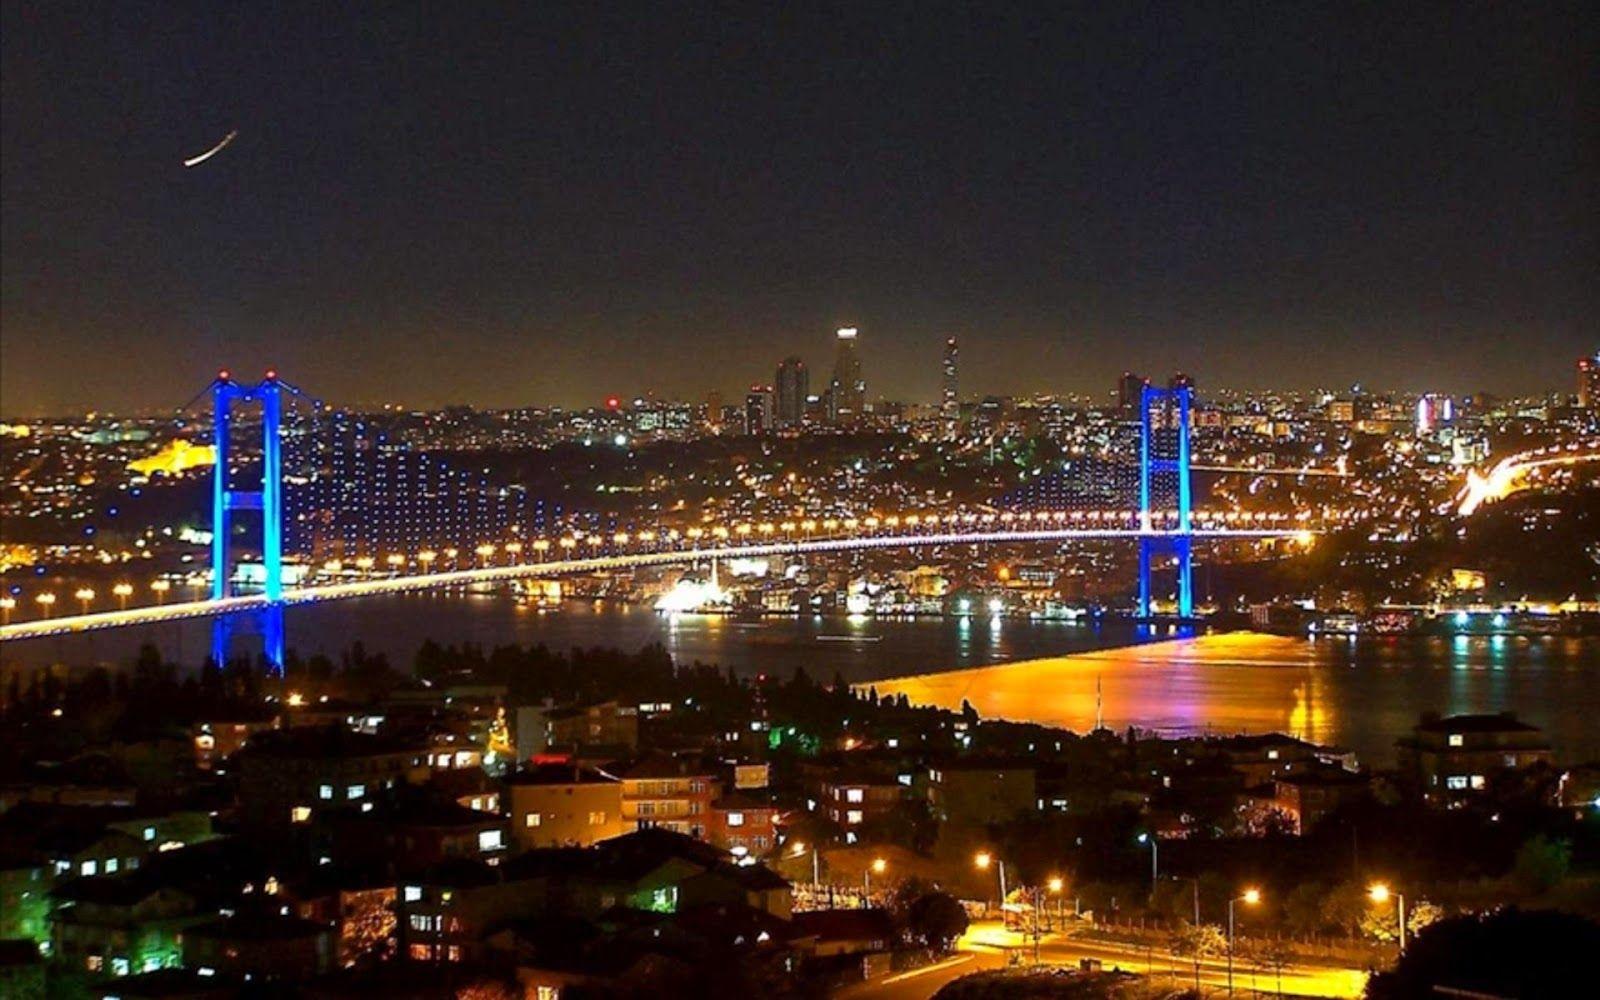 WOW: Download Istanbul City Night wallpaper